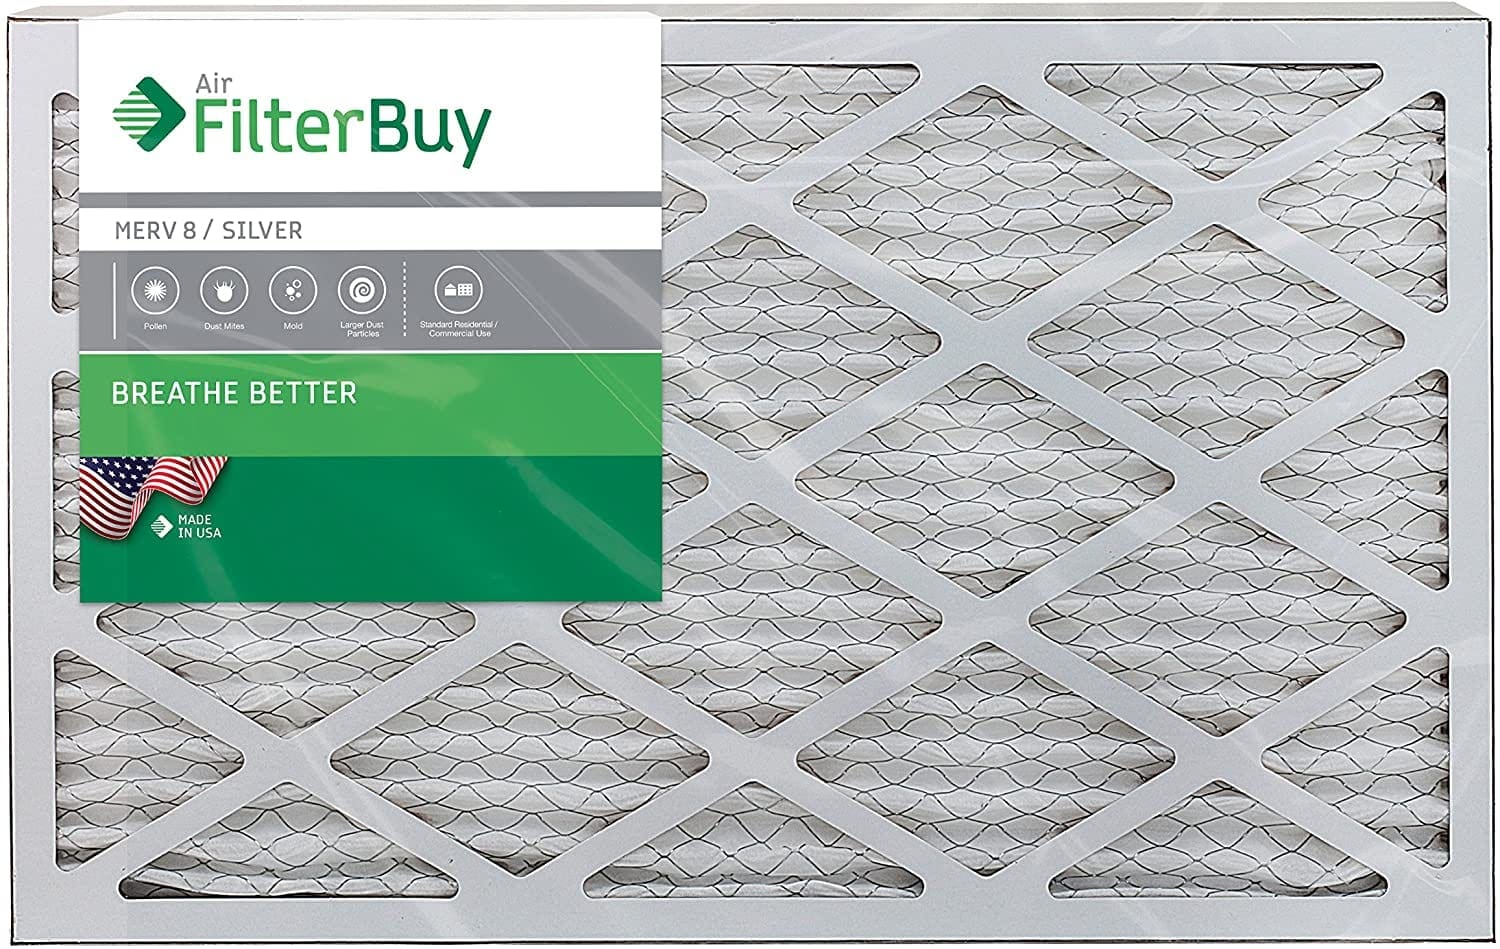 Filterbuy furnace filters with a medium MERV rating